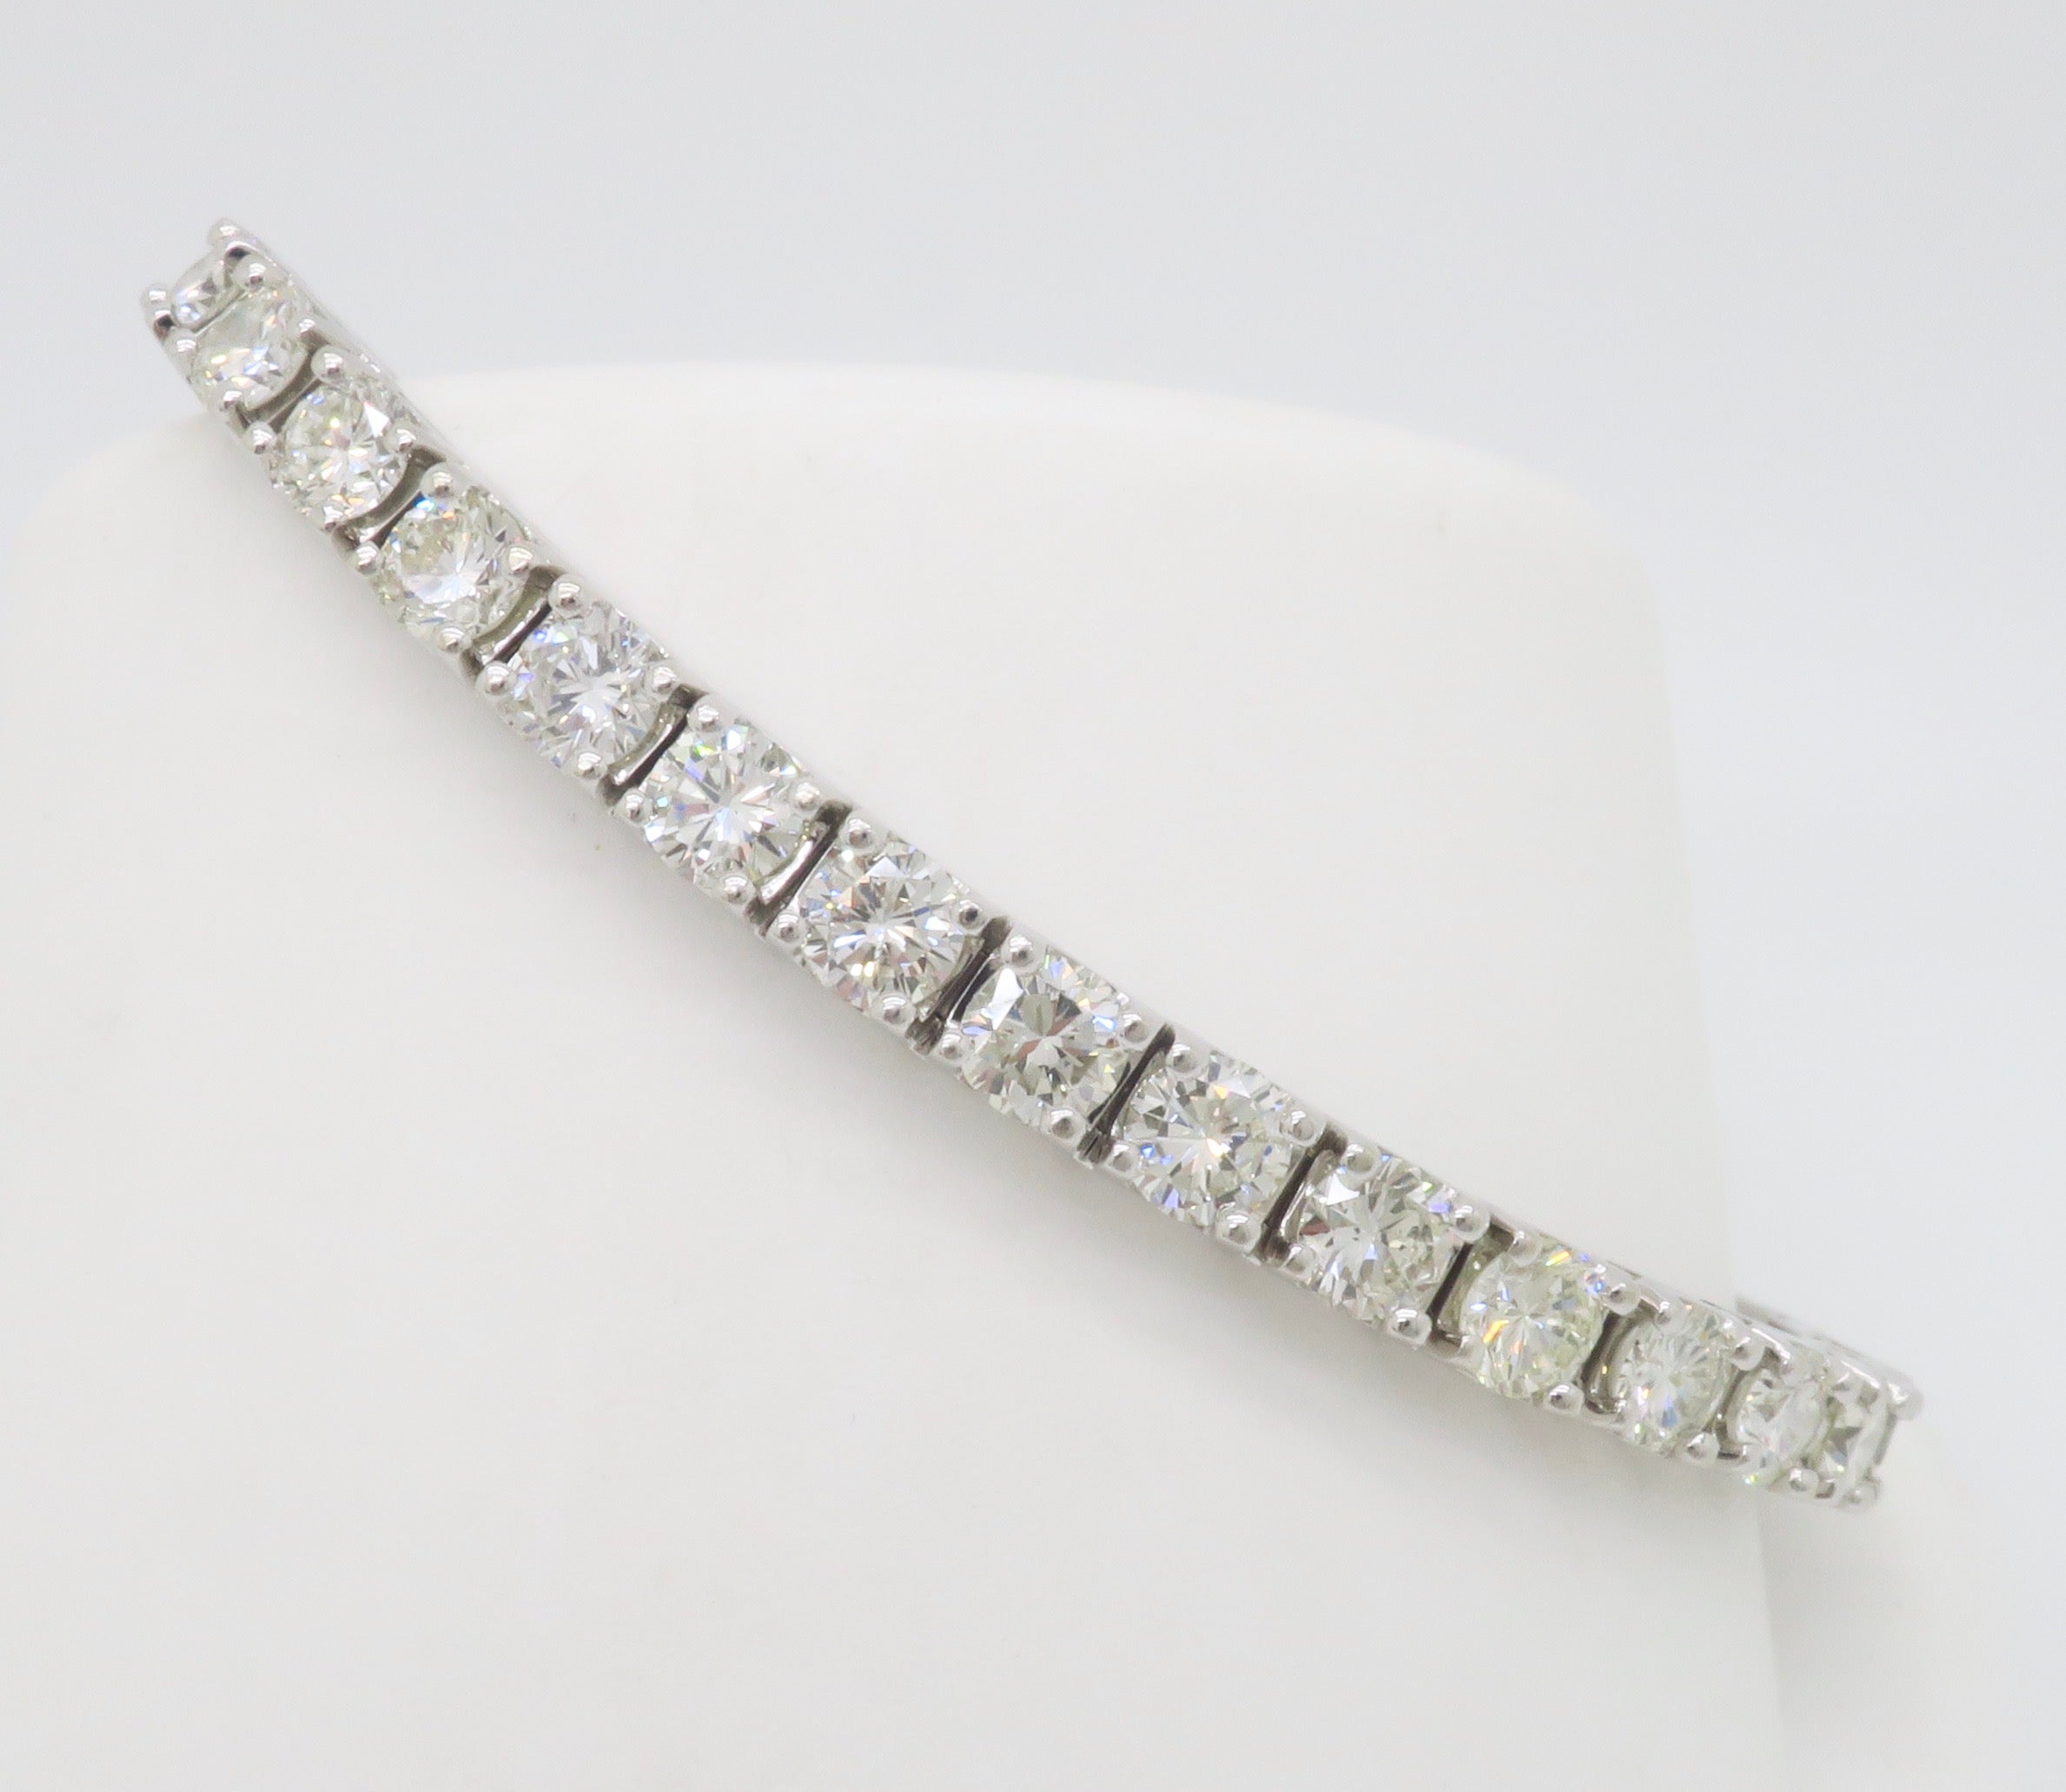 Absolutely stunning 10.15CTW Diamond tennis bracelet. 

Diamond Carat Weight: 10.15CTW
Diamond Cut: Round Brilliant Cut 
Color: H-I
Clarity: VS1-SI2
Metal: 14K White Gold
Marked/Tested: Stamped 